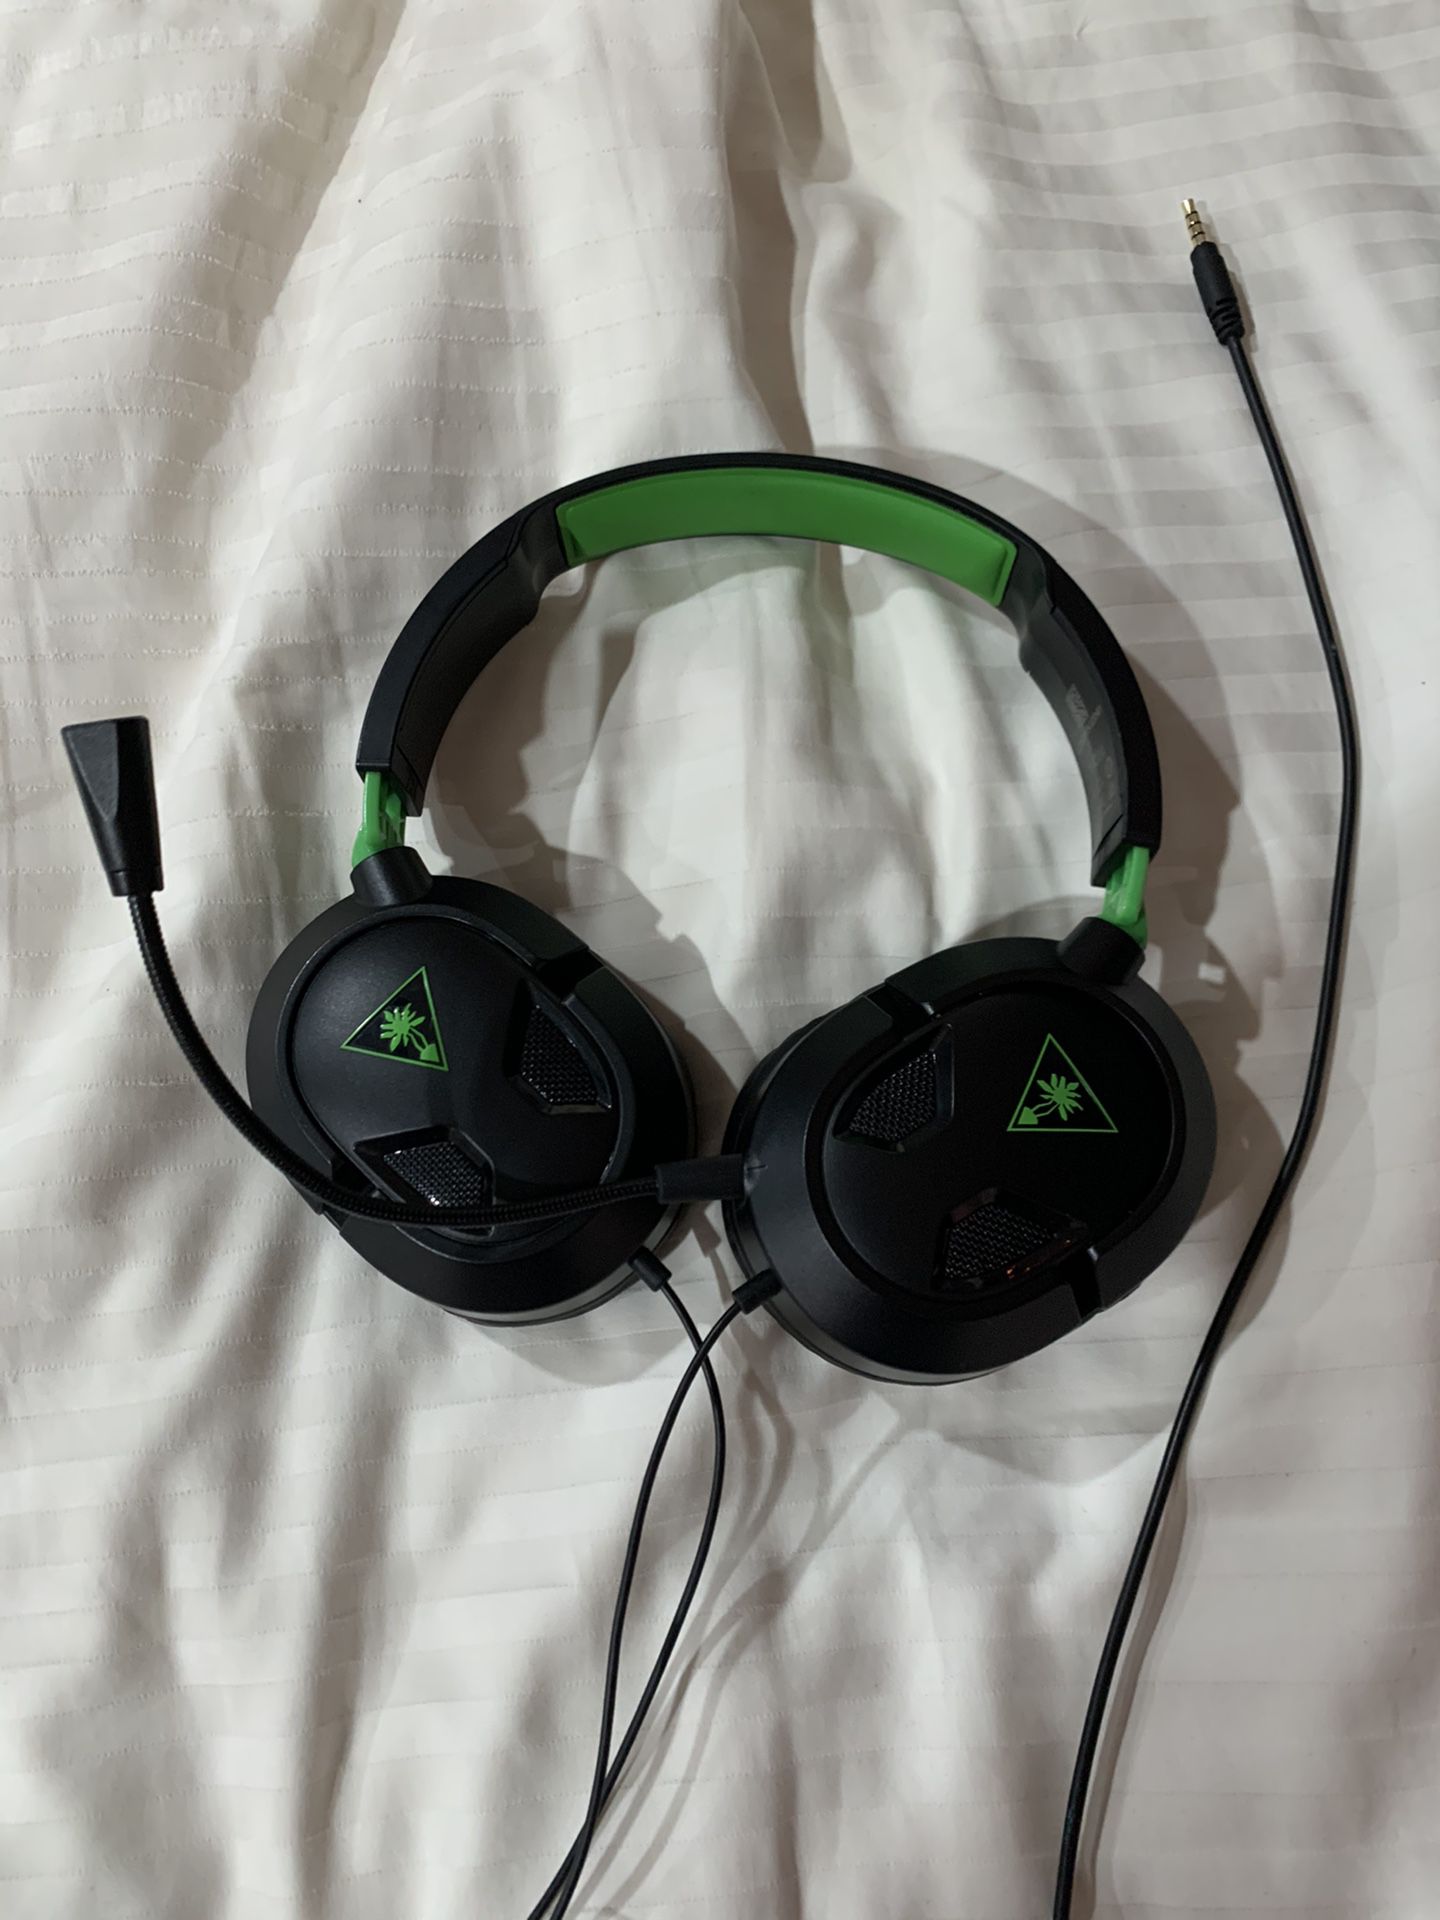 Xbox one turtle beach headset. Works for ps4